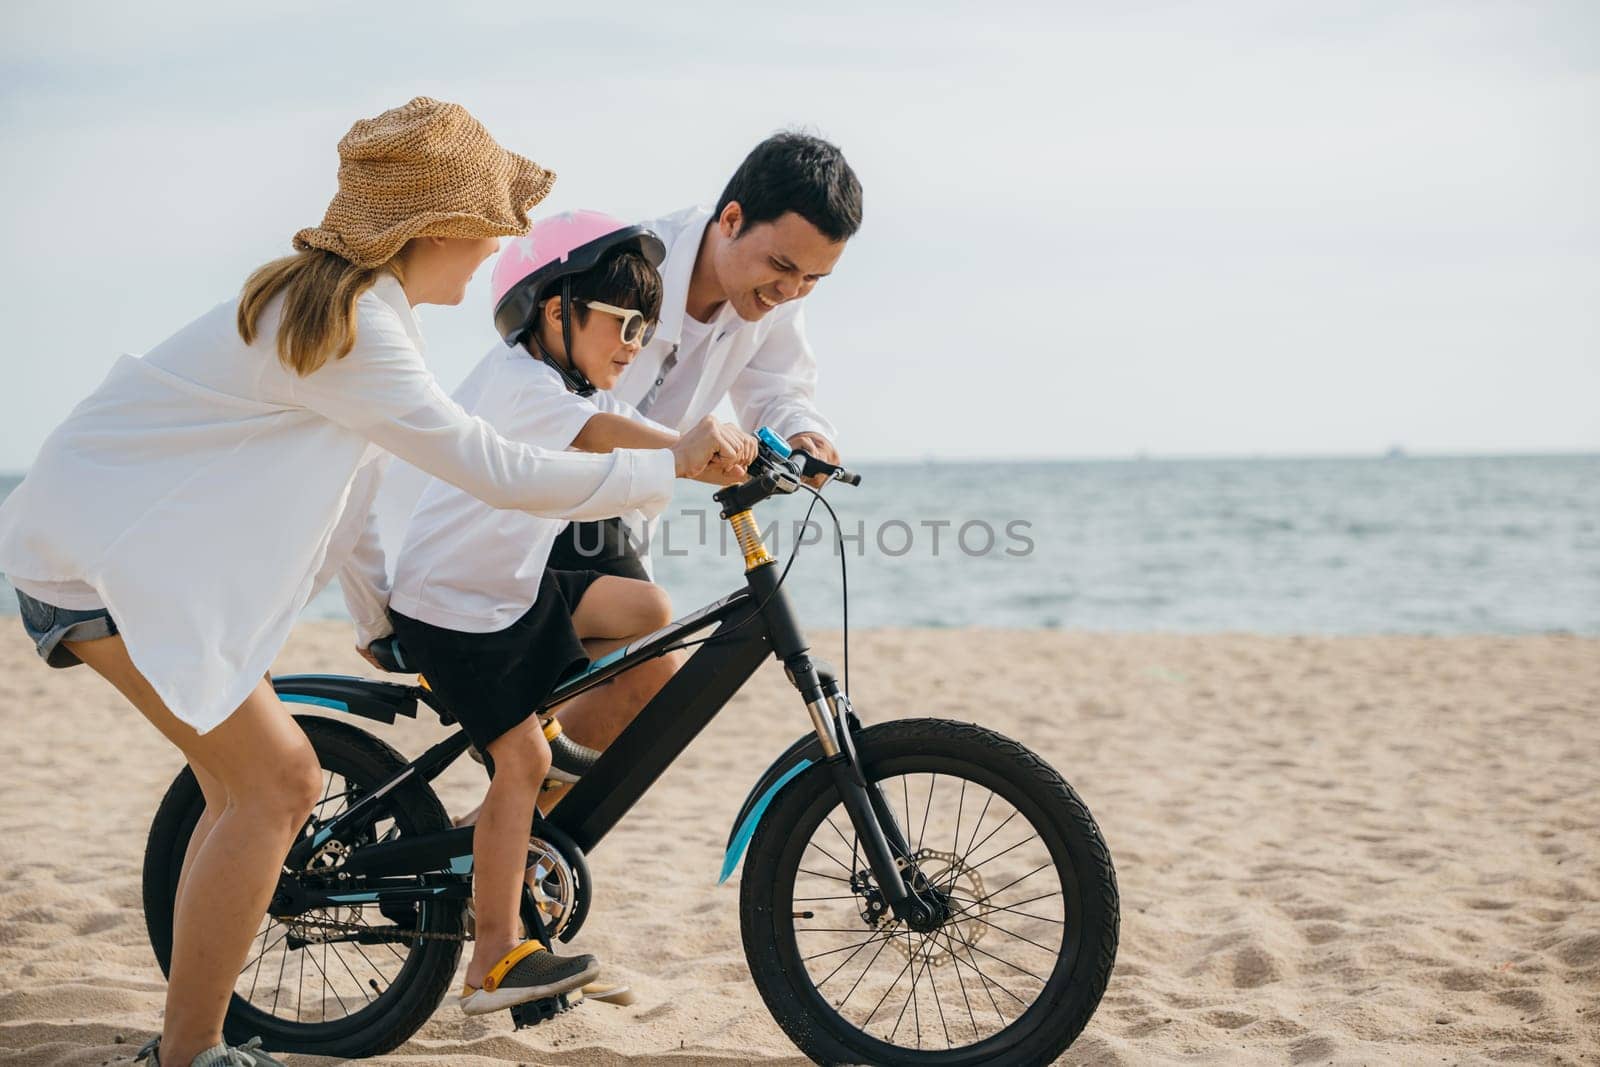 Happy family moments on summer road trip, Parents teach their children to ride bicycles on sandy beach near sea. Smiles safety helmets and carefree spirit of childhood fill this cheerful scene. by Sorapop